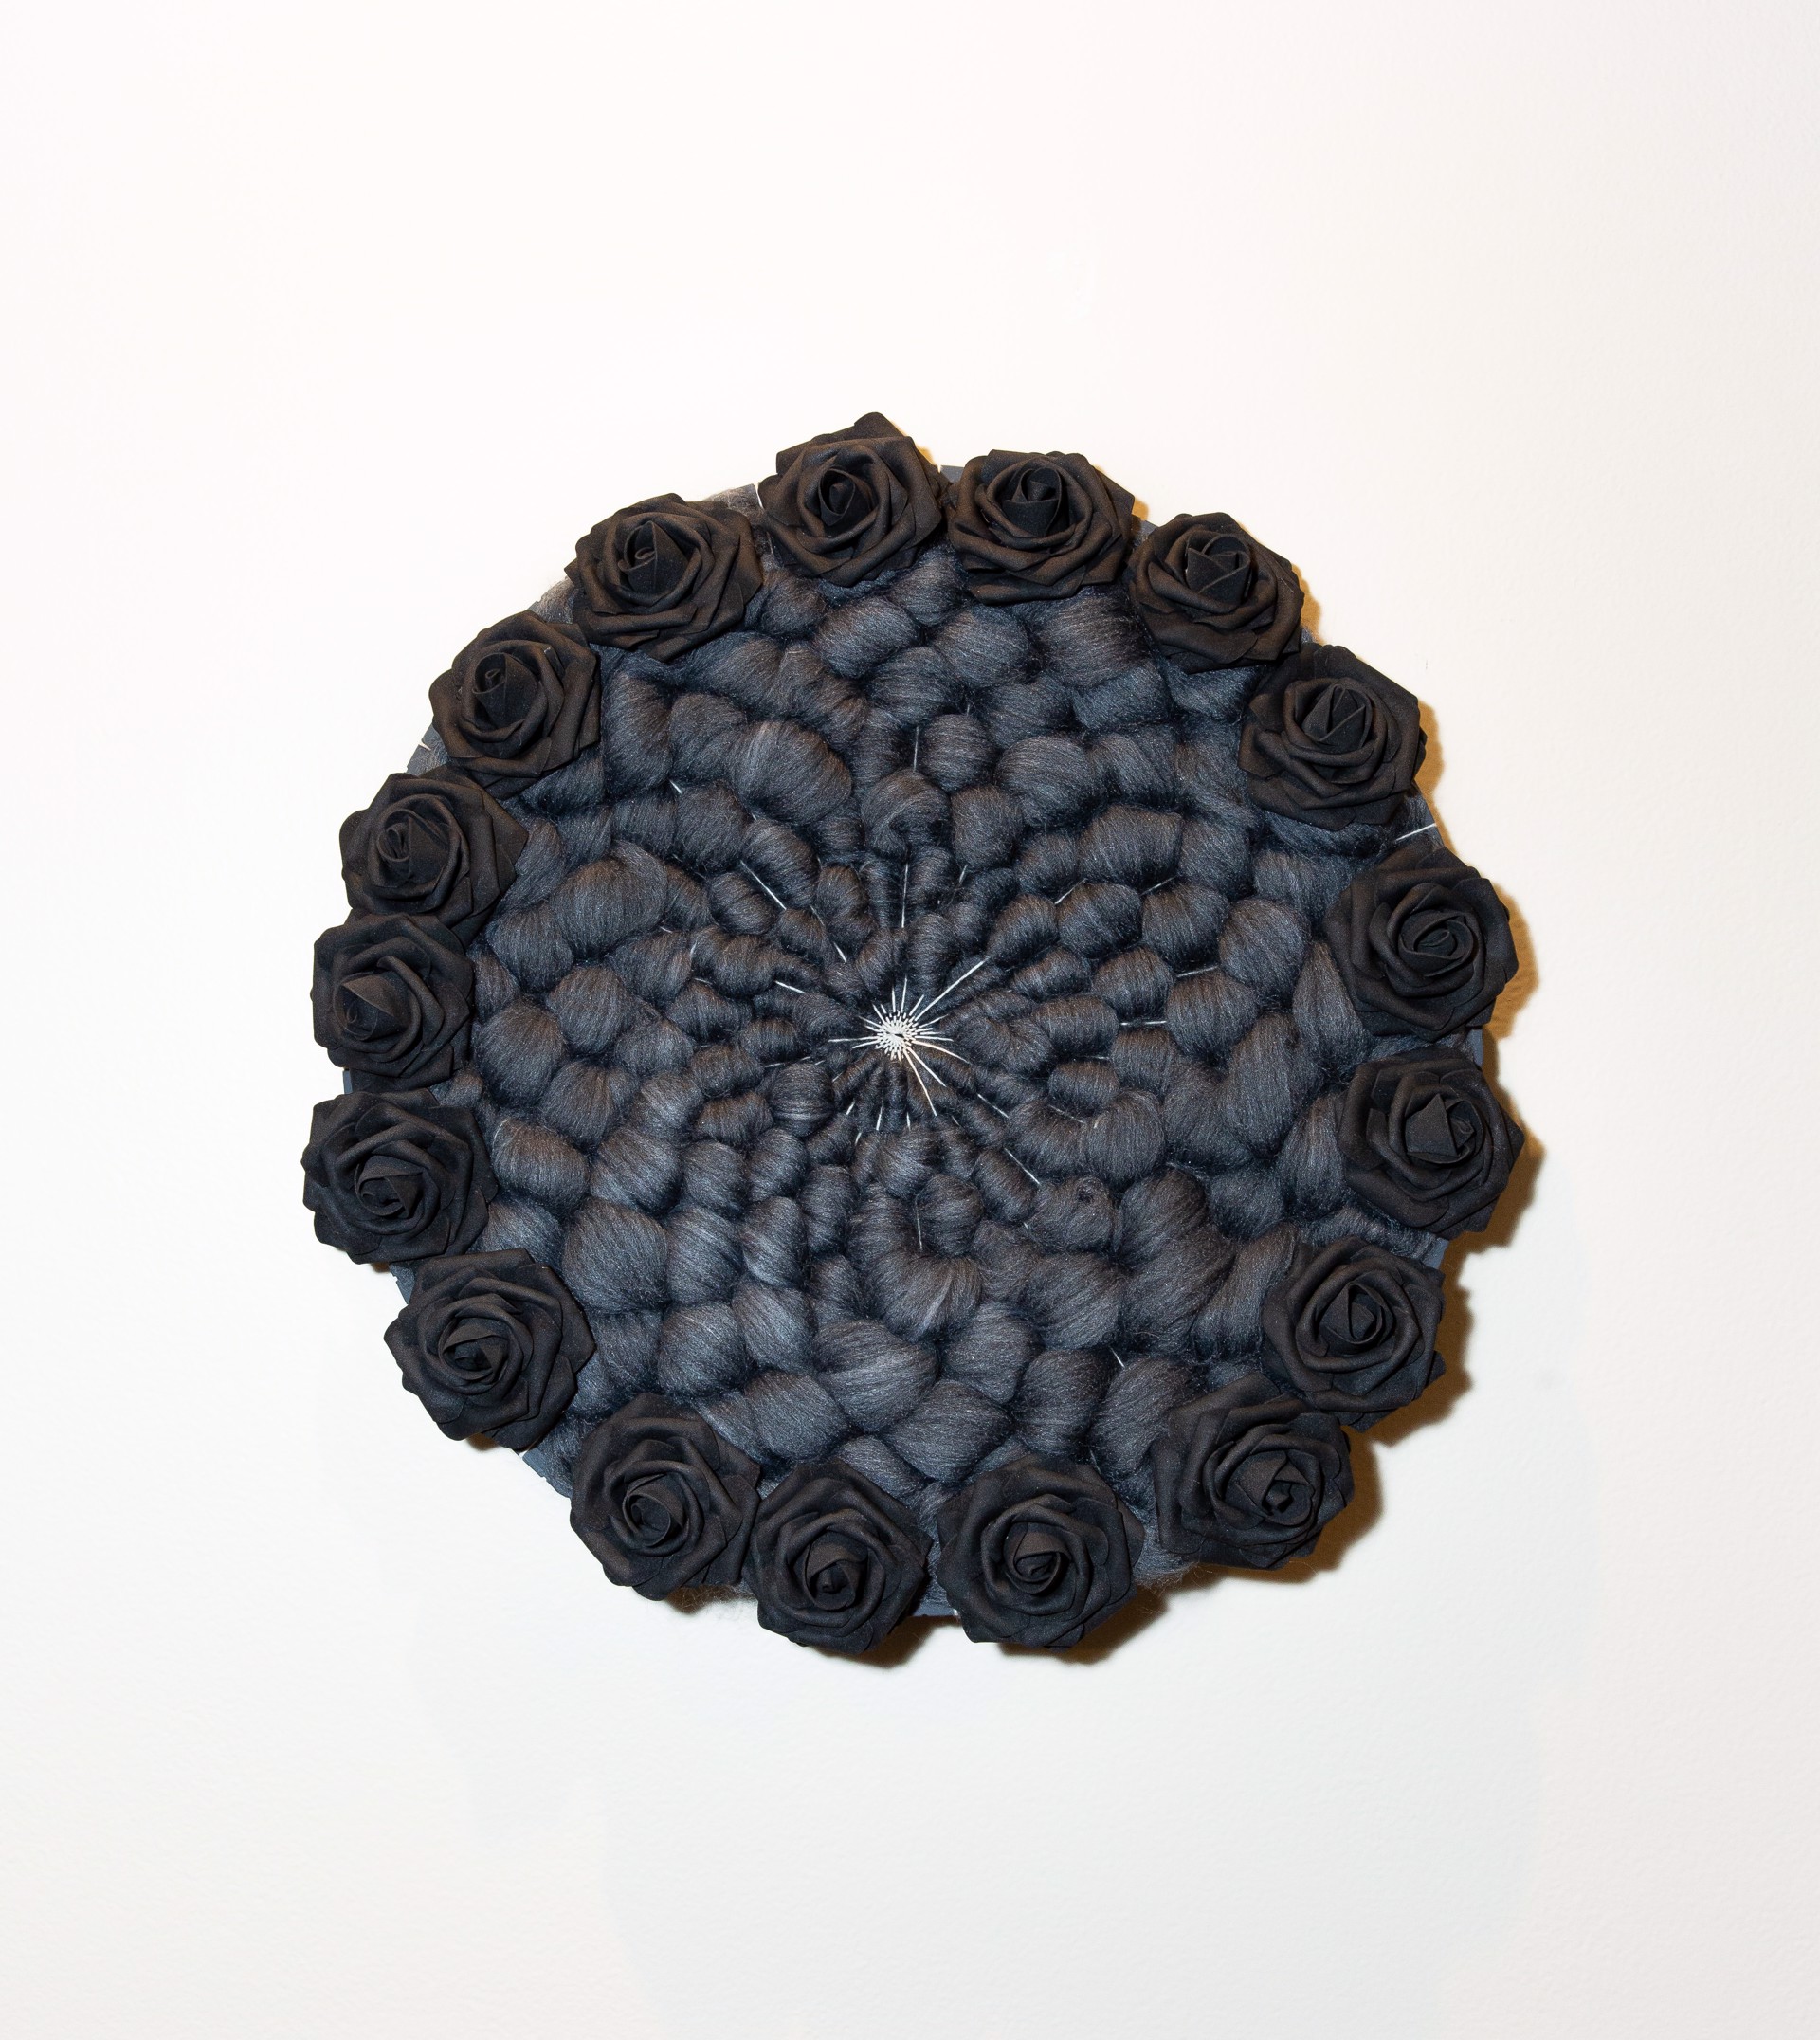 Mourning Wreath by Pam Marlene Taylor